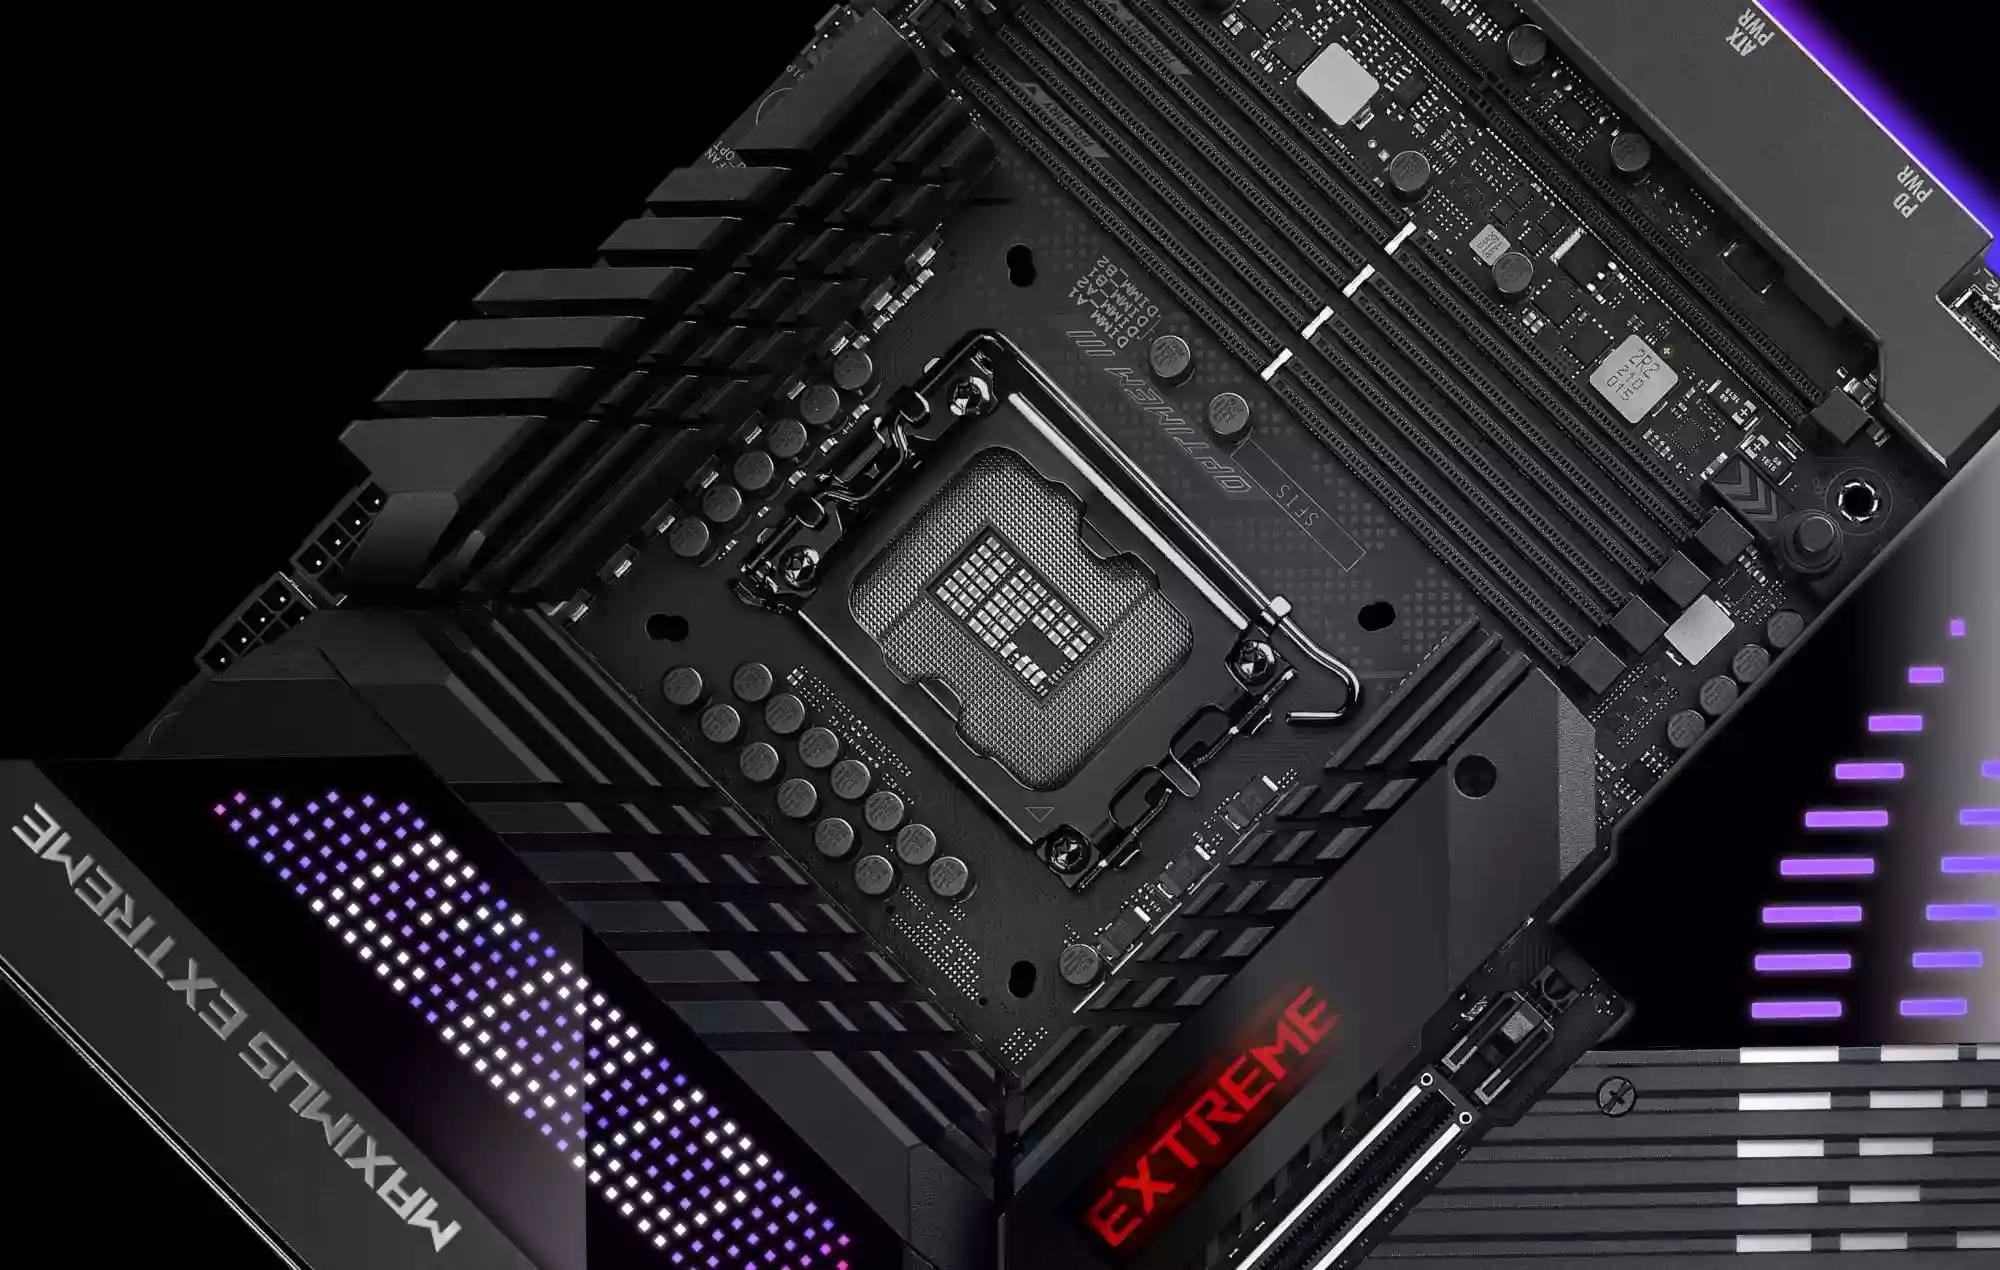 The AM6 socket on the ROG Maximus Z790 Extreme motherboard